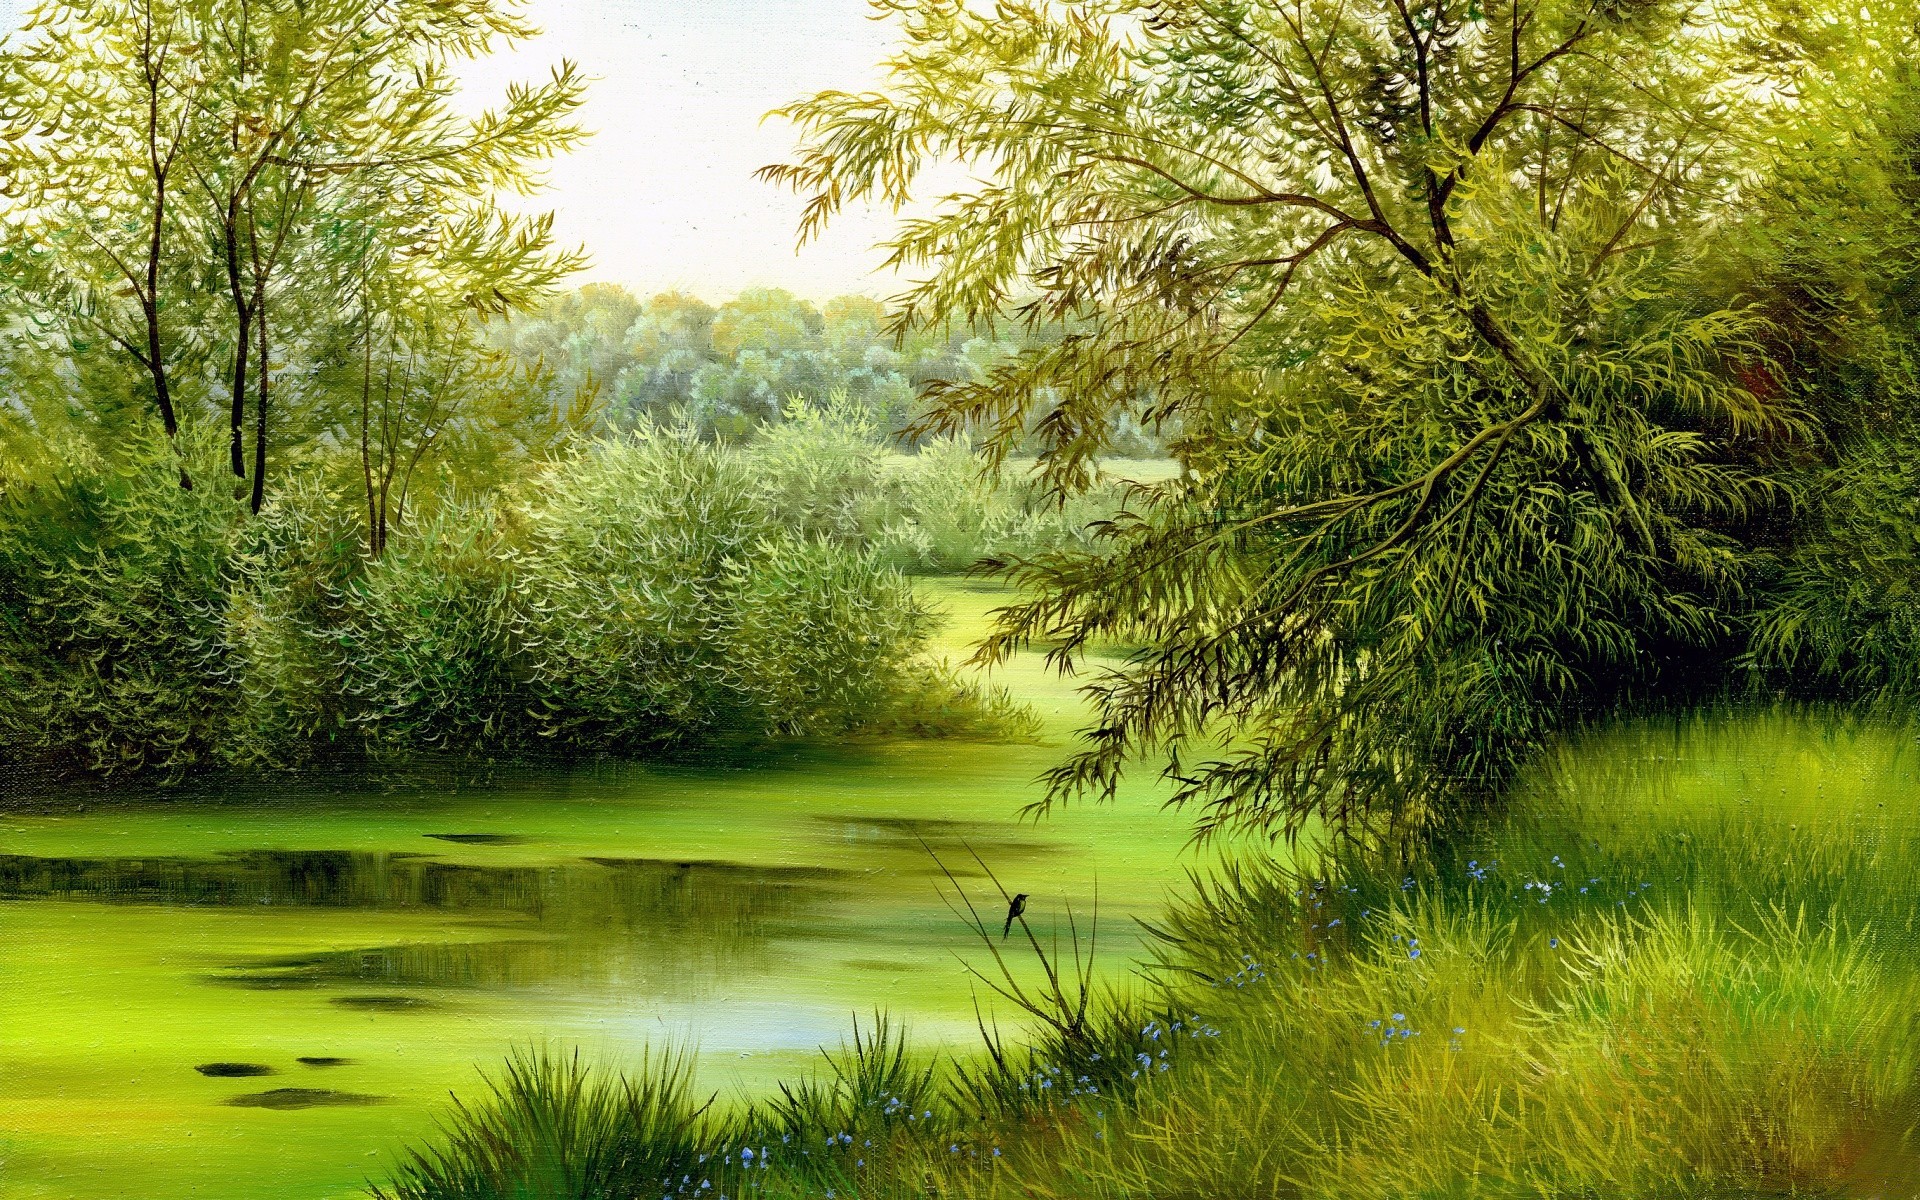 drawings nature landscape tree grass park wood summer leaf outdoors water scenic flora season environment lush fair weather scenery dawn lake